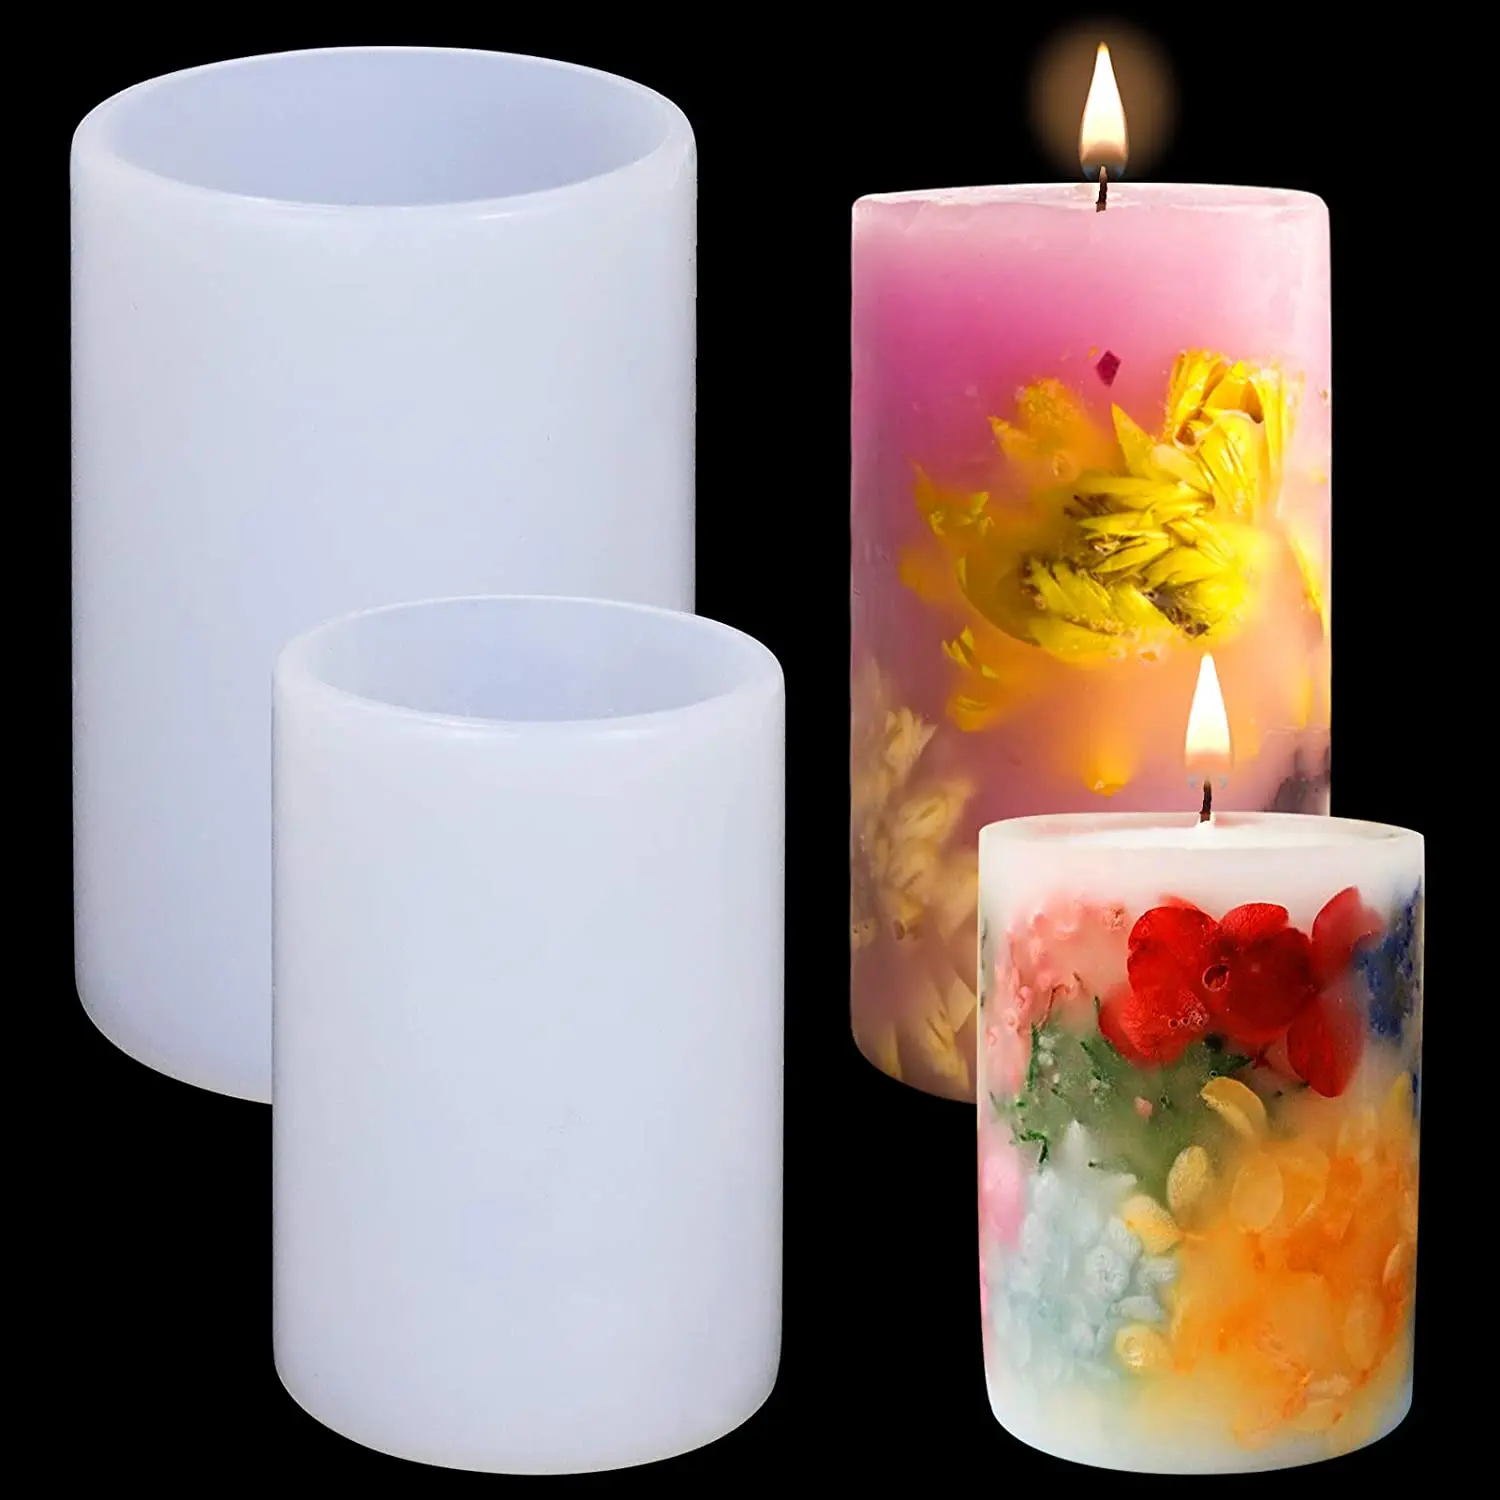 Home Decoration Soaps 3pcs Silicone Candle Molds Kit for Candle Making Cylinder Lotus Resin Casting Epoxy Molds with 20 Pcs Candle Wicks for Making Wax Candles Flower Specimen Clay Craft 